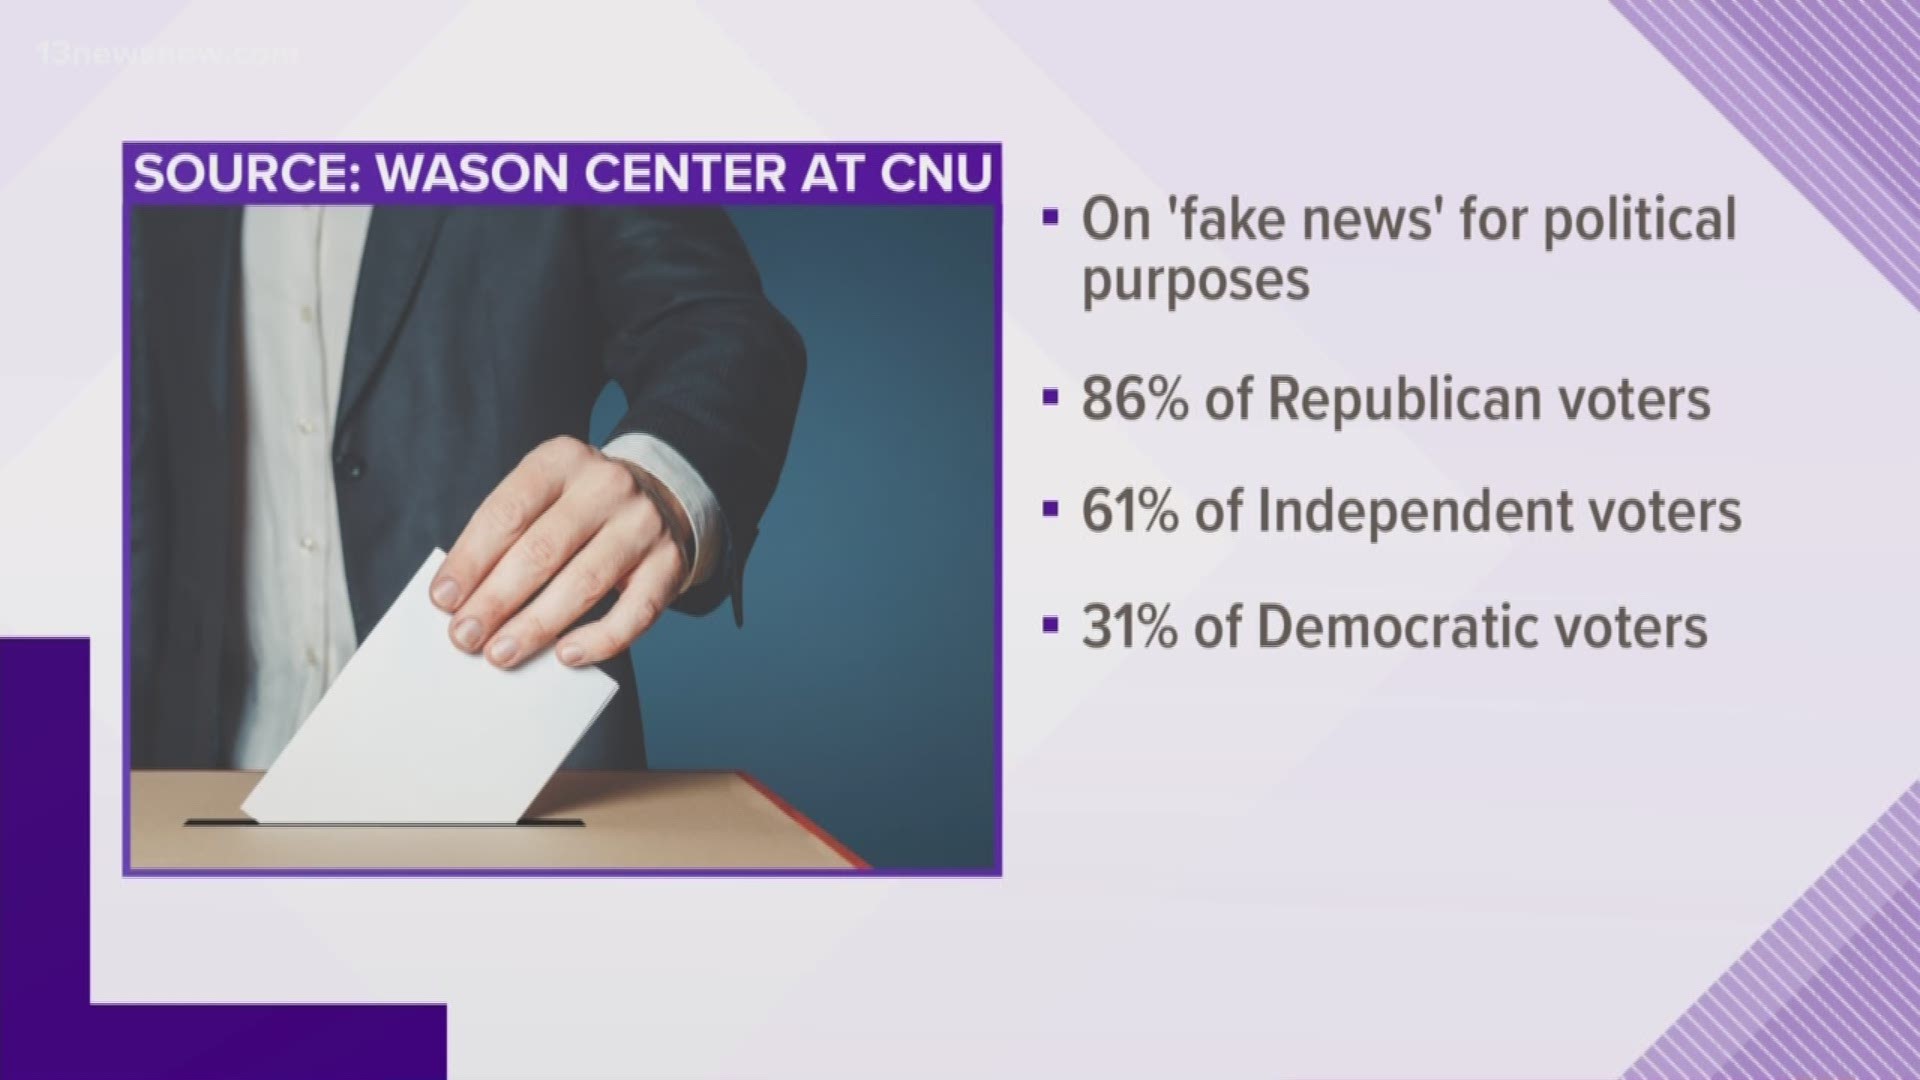 A national survey from Christopher Newport University shows 86percent of Republican voters, 61 percent of independent voters, and 31 percent of Democratic voters believe news organizations publish fake news story.